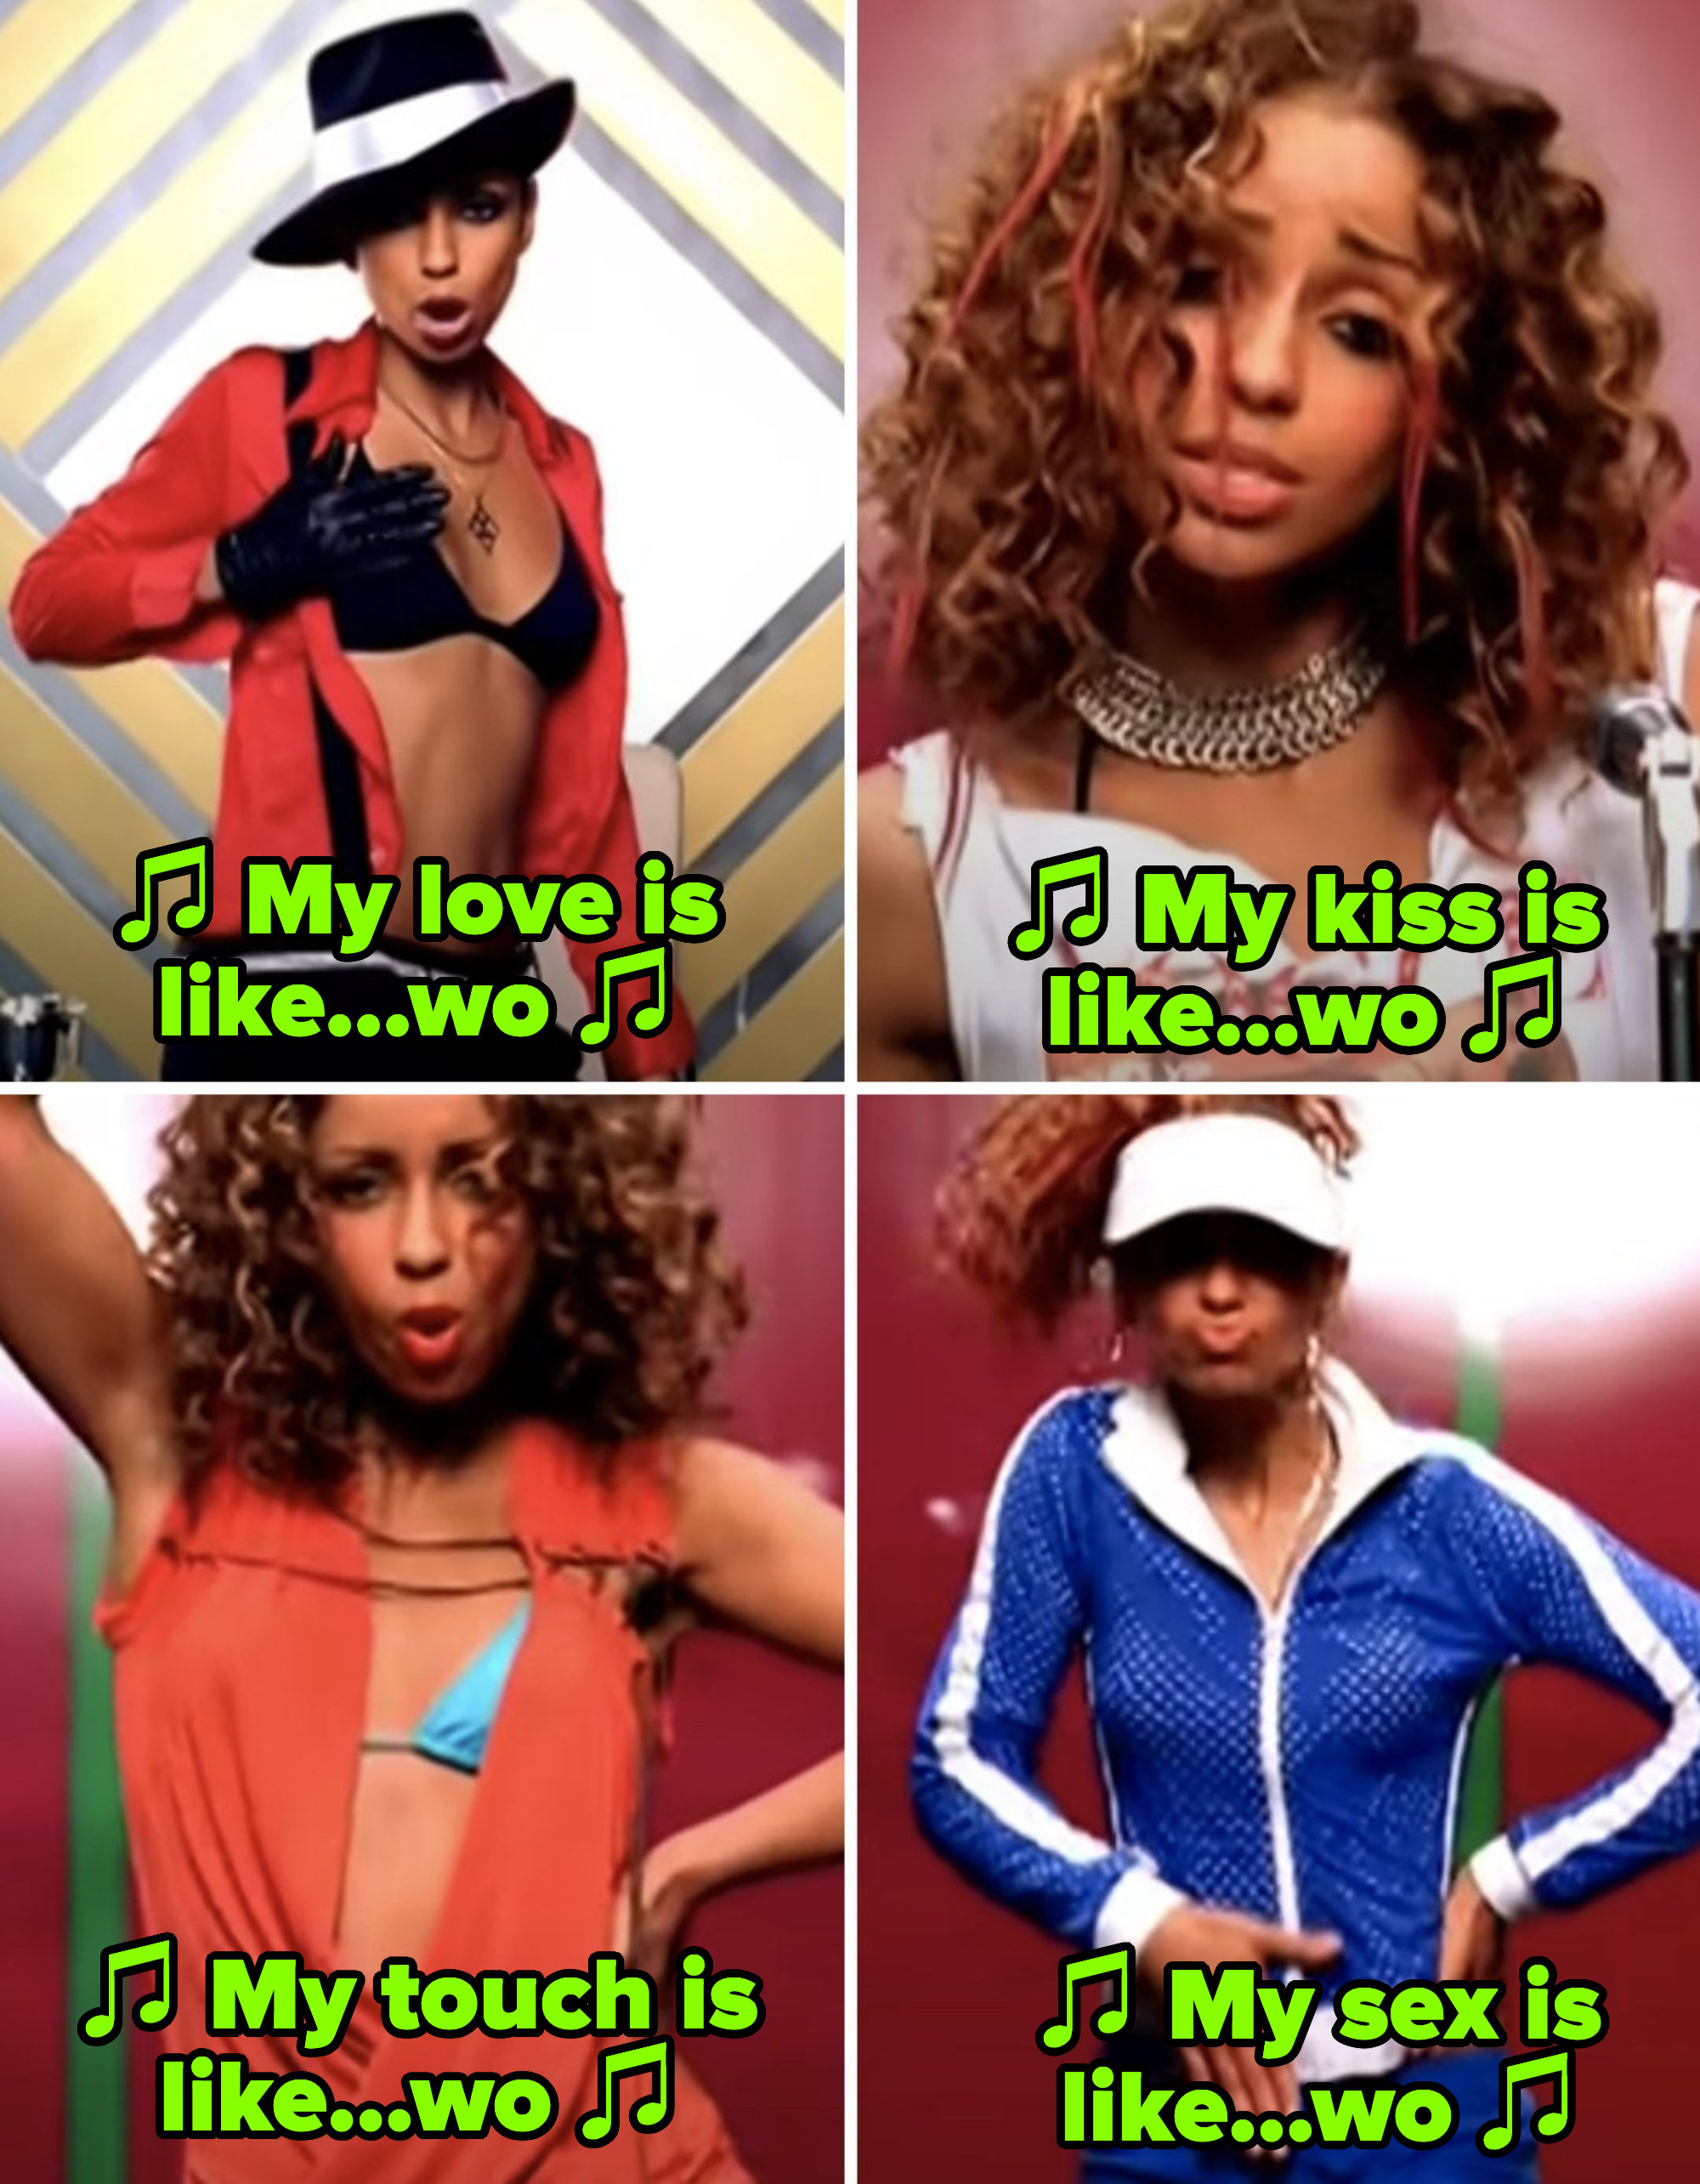 Mýa singing: &quot;My love is like...wo. My kiss is like...wo. My touch is like...wo. My sex is like...wo&quot;